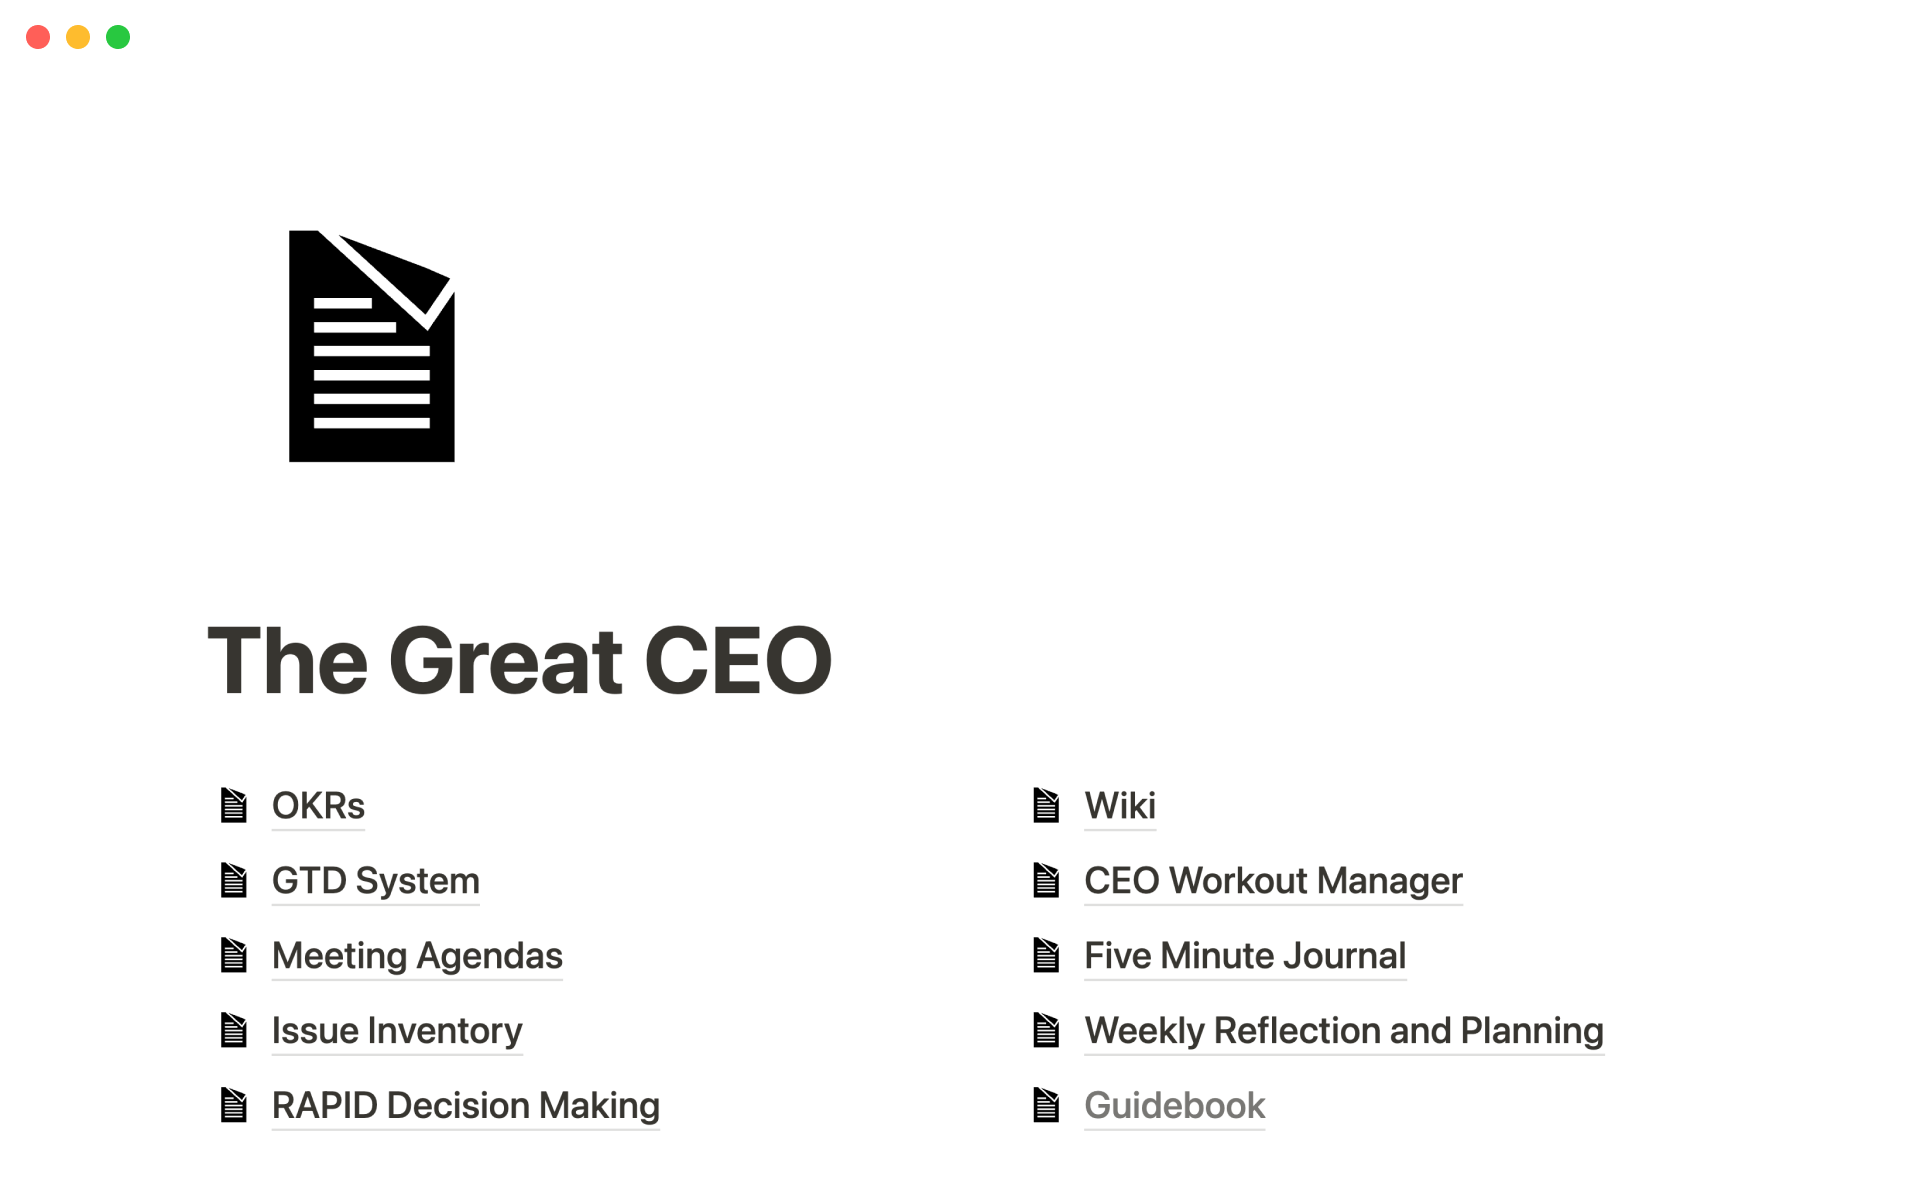 This template helps CEOs and leaders operationalize their business and life in order to make them more conscious, effective, and capable.